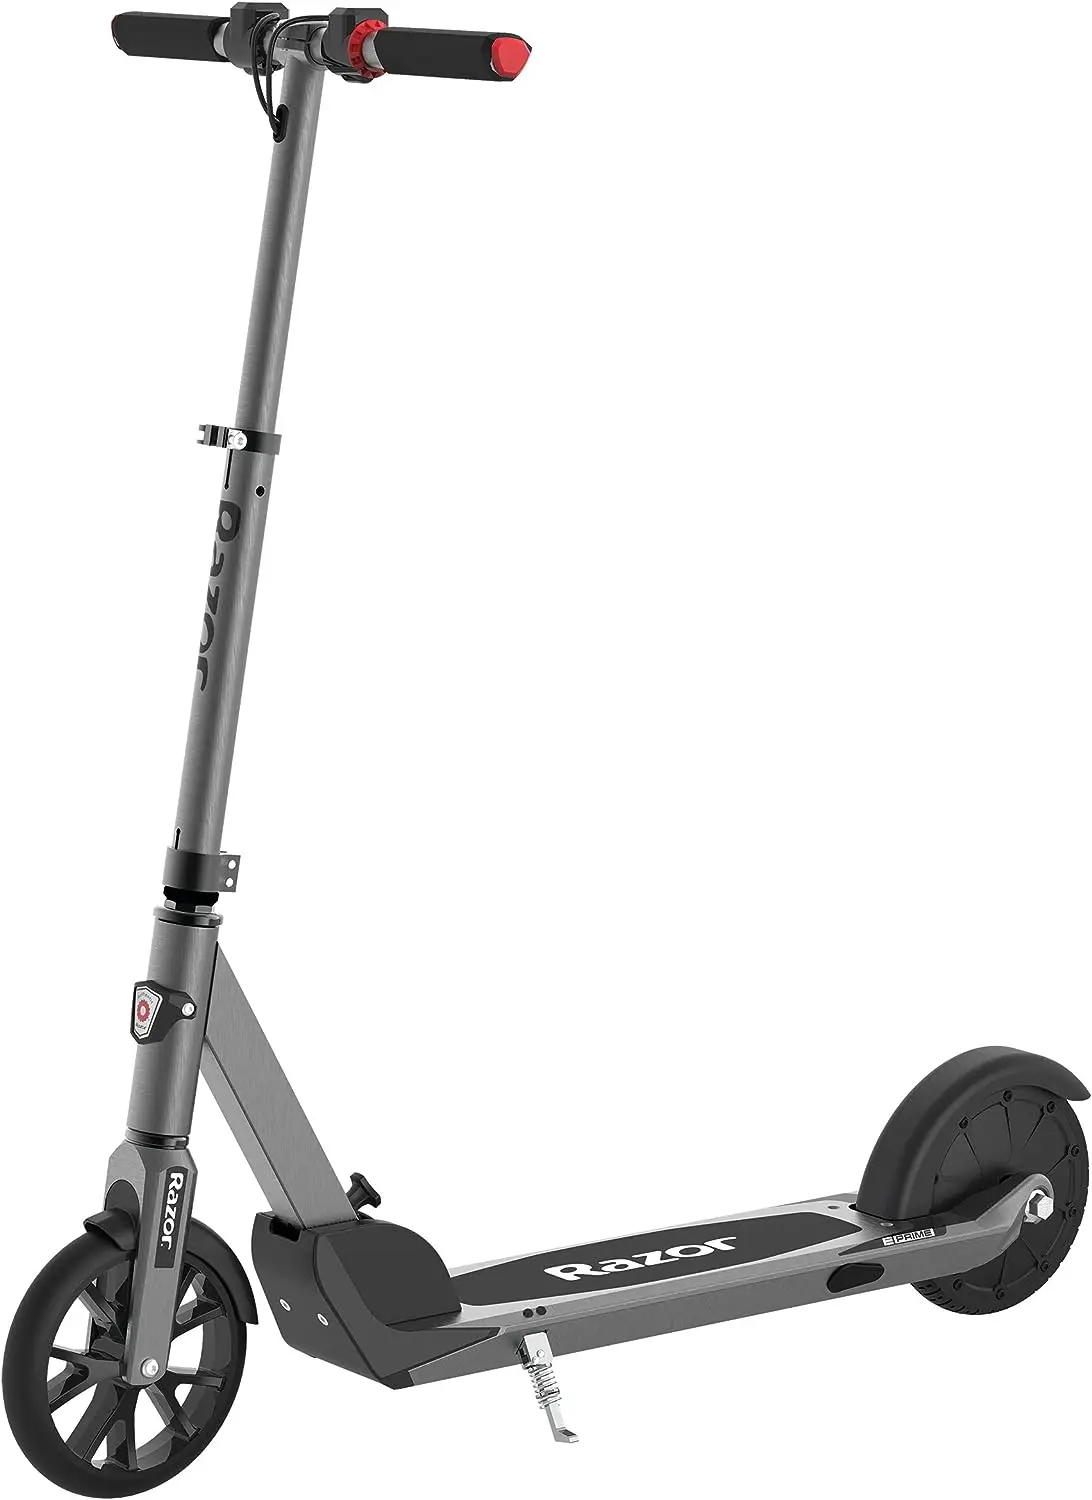 

Prime Adult Scooter - Up to 15 mph, 8" Airless Flat-free Tires, Rear Wheel Drive, 250W Brushless Hub Motor, Lightweight Alu